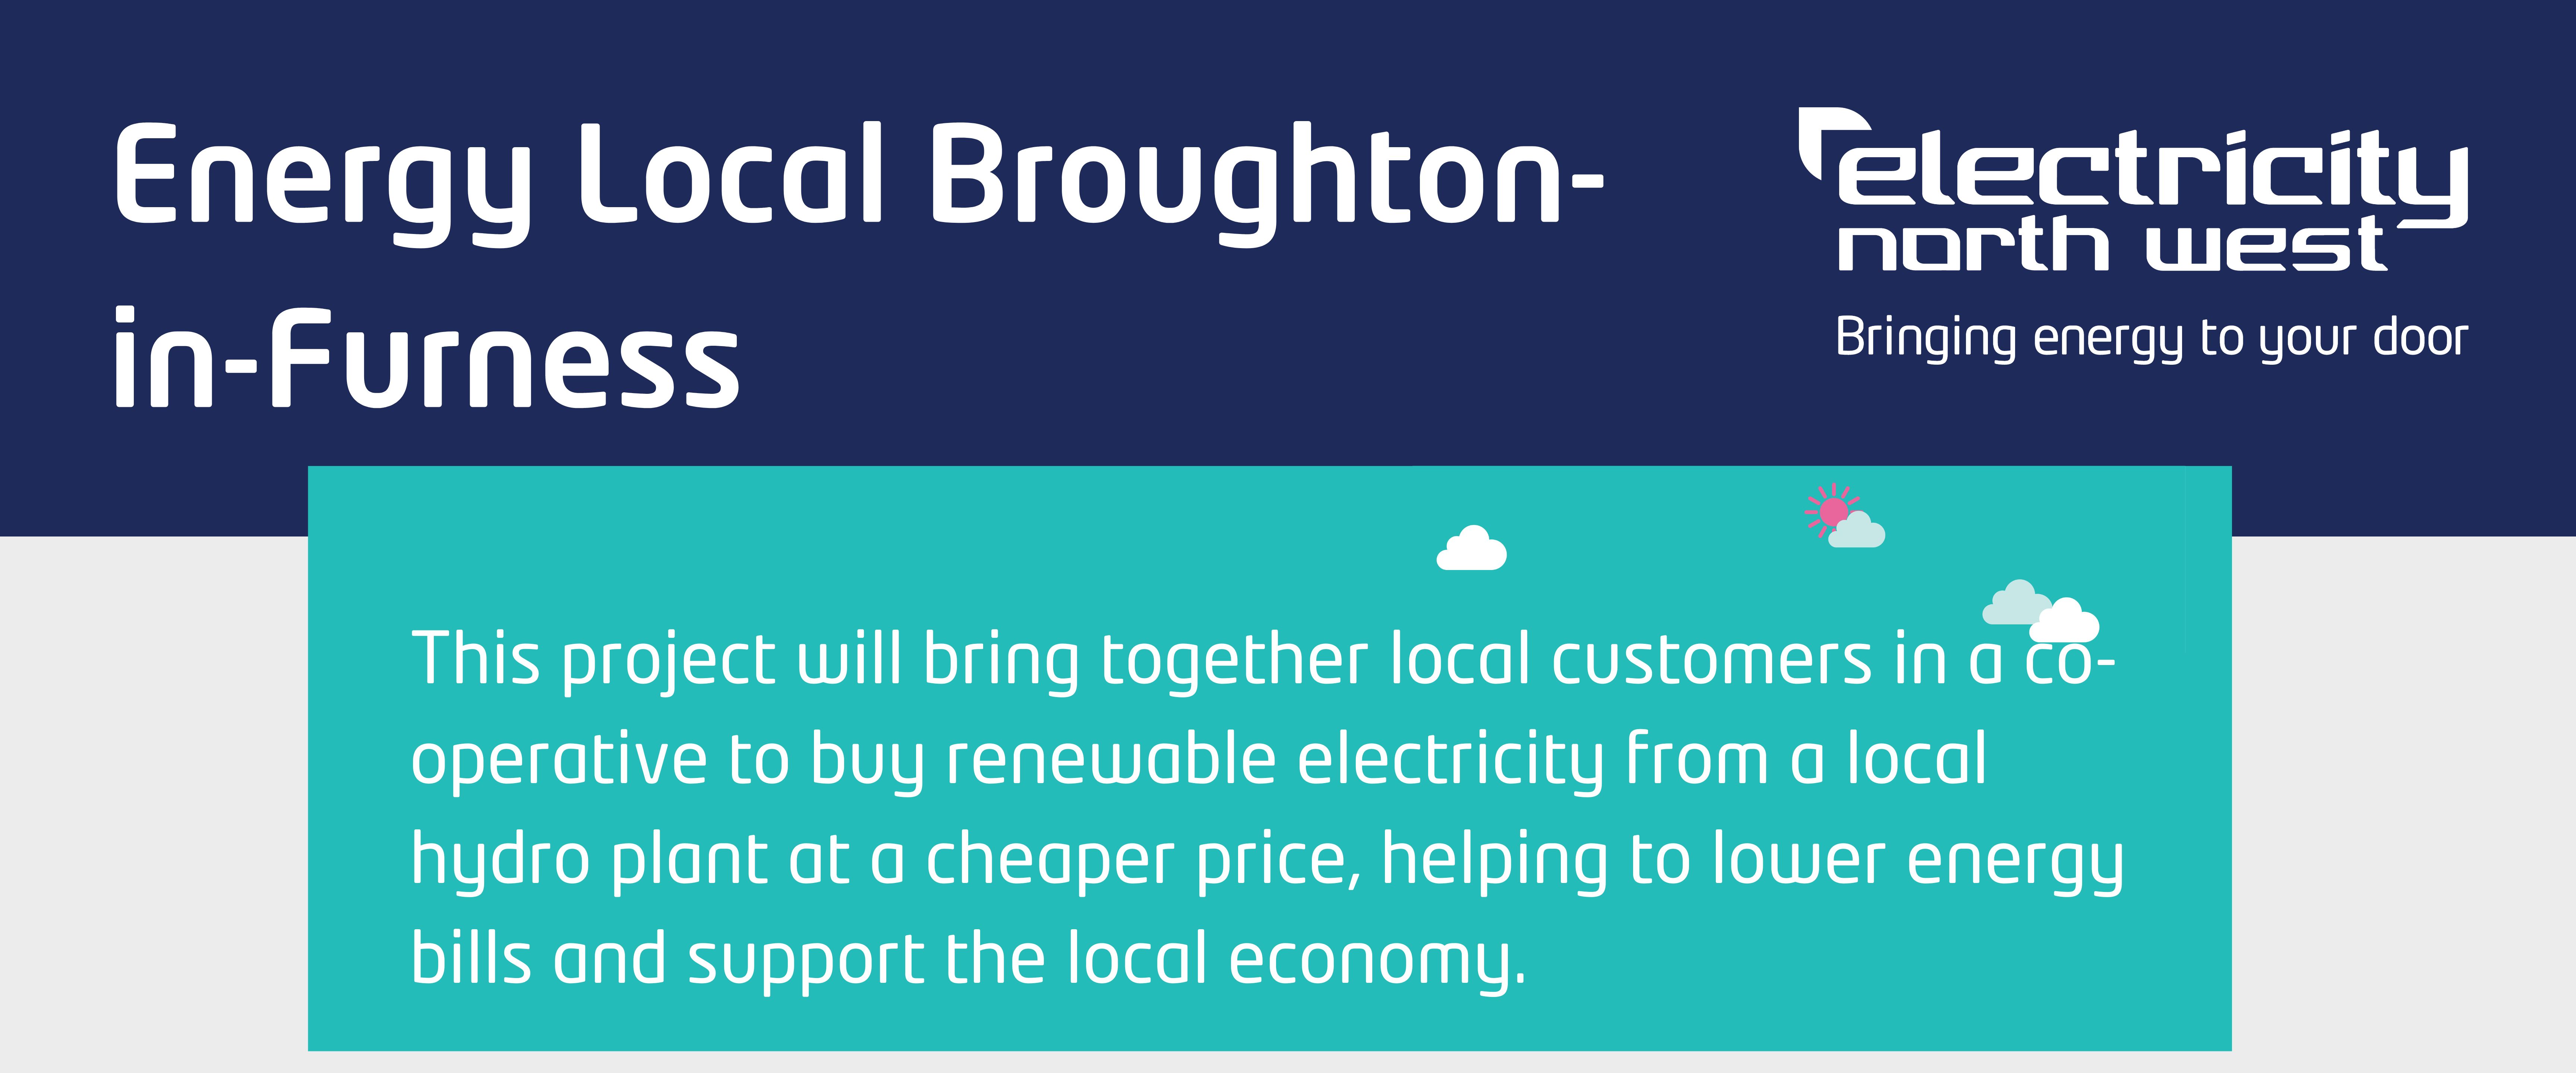 Energy Local Broughton-in-Furness, This project will bring together local customers in a co-operative to buy renewable electricity from a local hydro plant at a cheaper price, helping to lower energy bills and support the local economy.